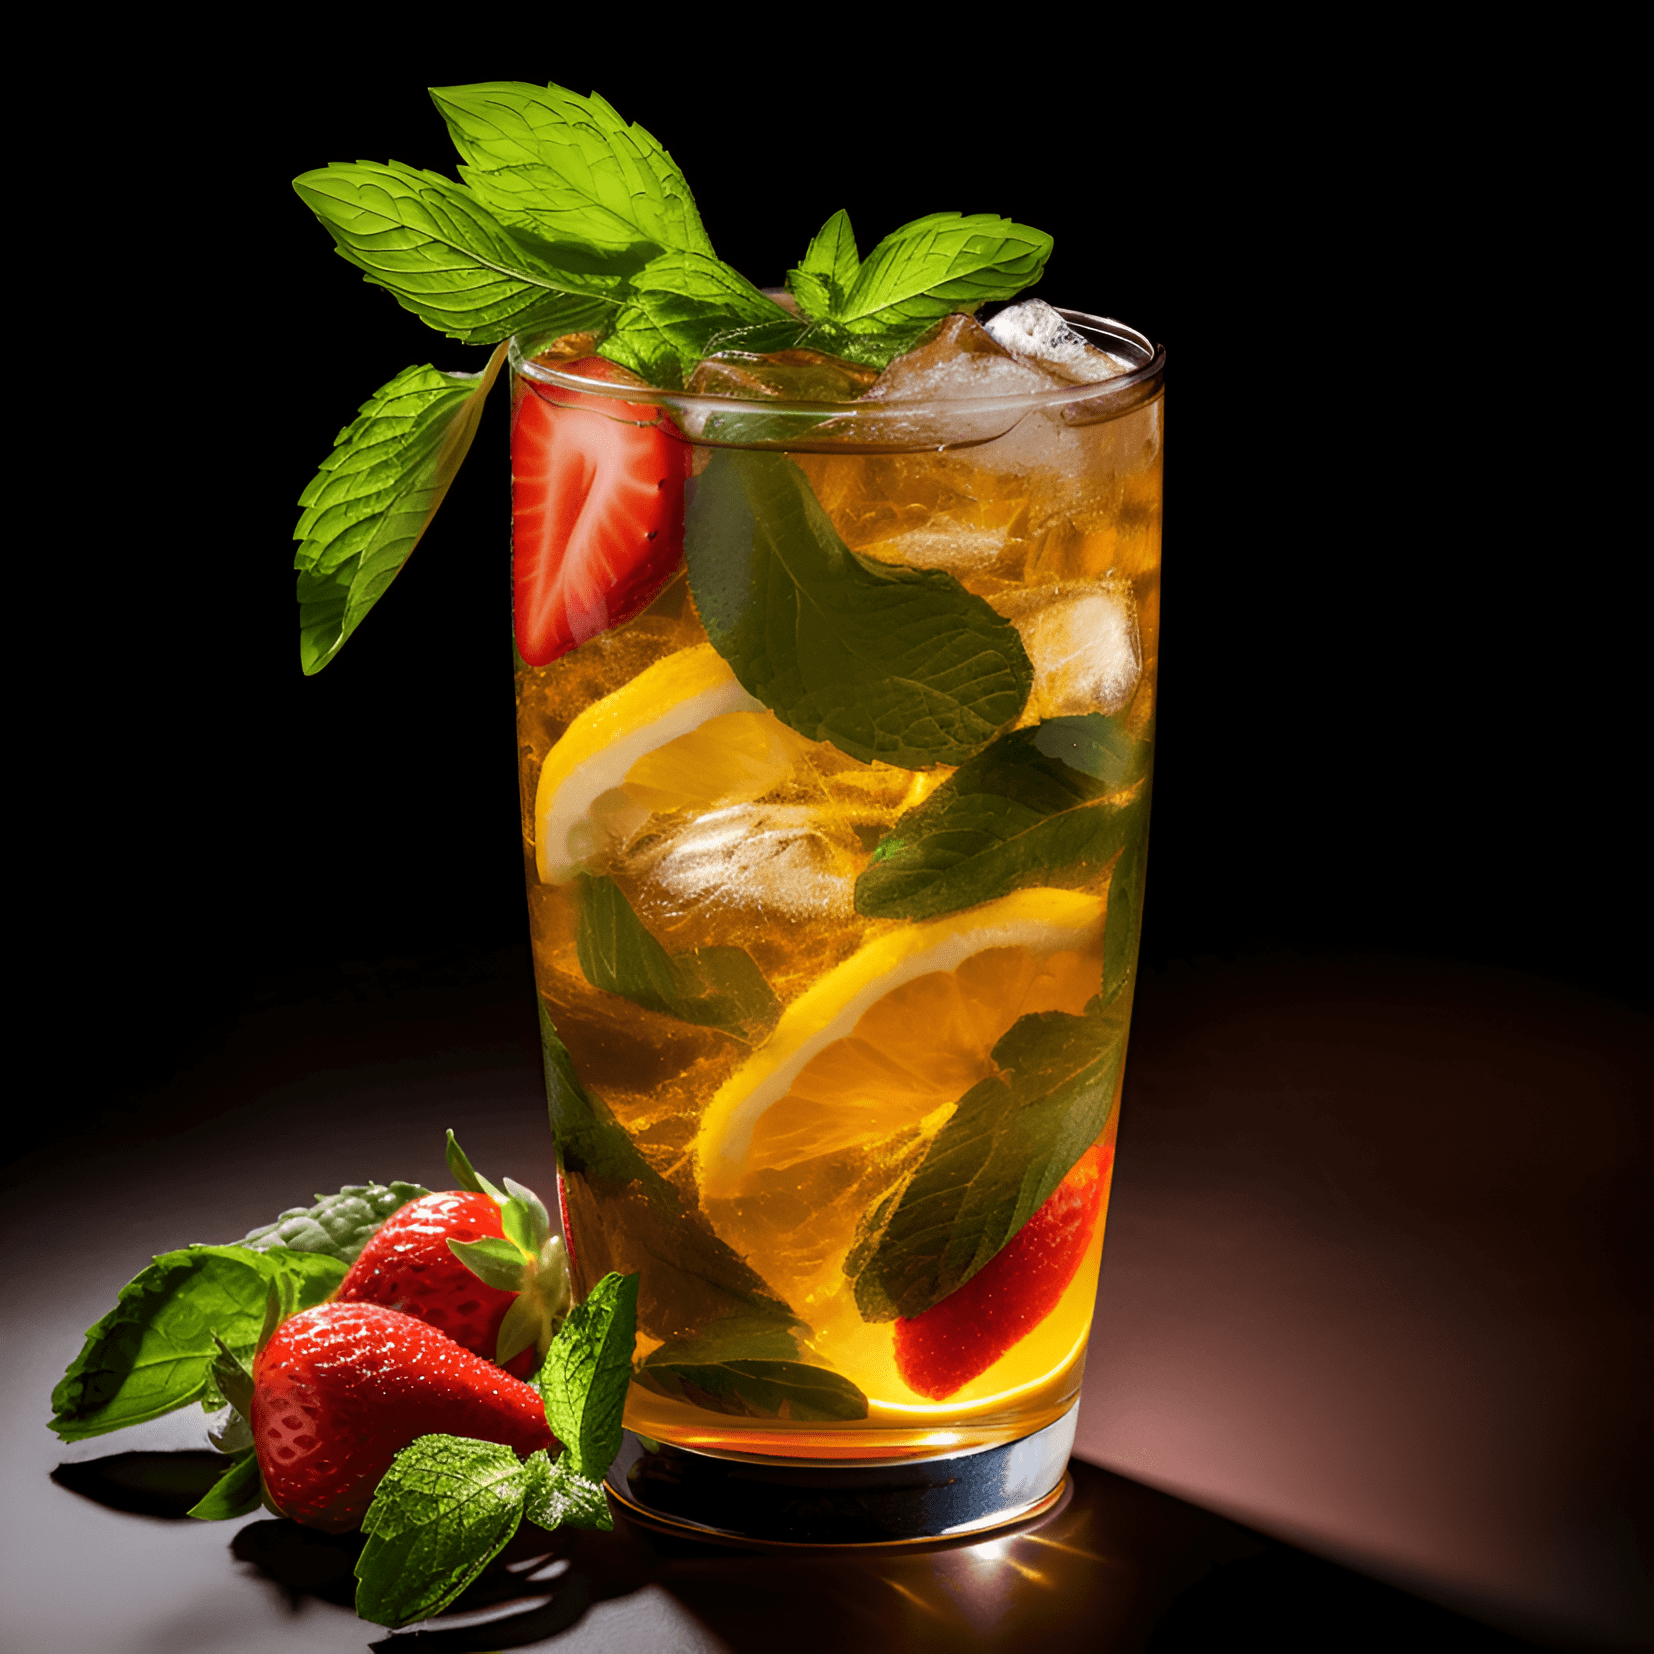 Pimm's Cup Cocktail Recipe - The Pimm's Cup is a refreshing, fruity, and slightly sweet cocktail with a hint of bitterness from the Pimm's No. 1. It has a light and crisp taste, perfect for warm summer days.